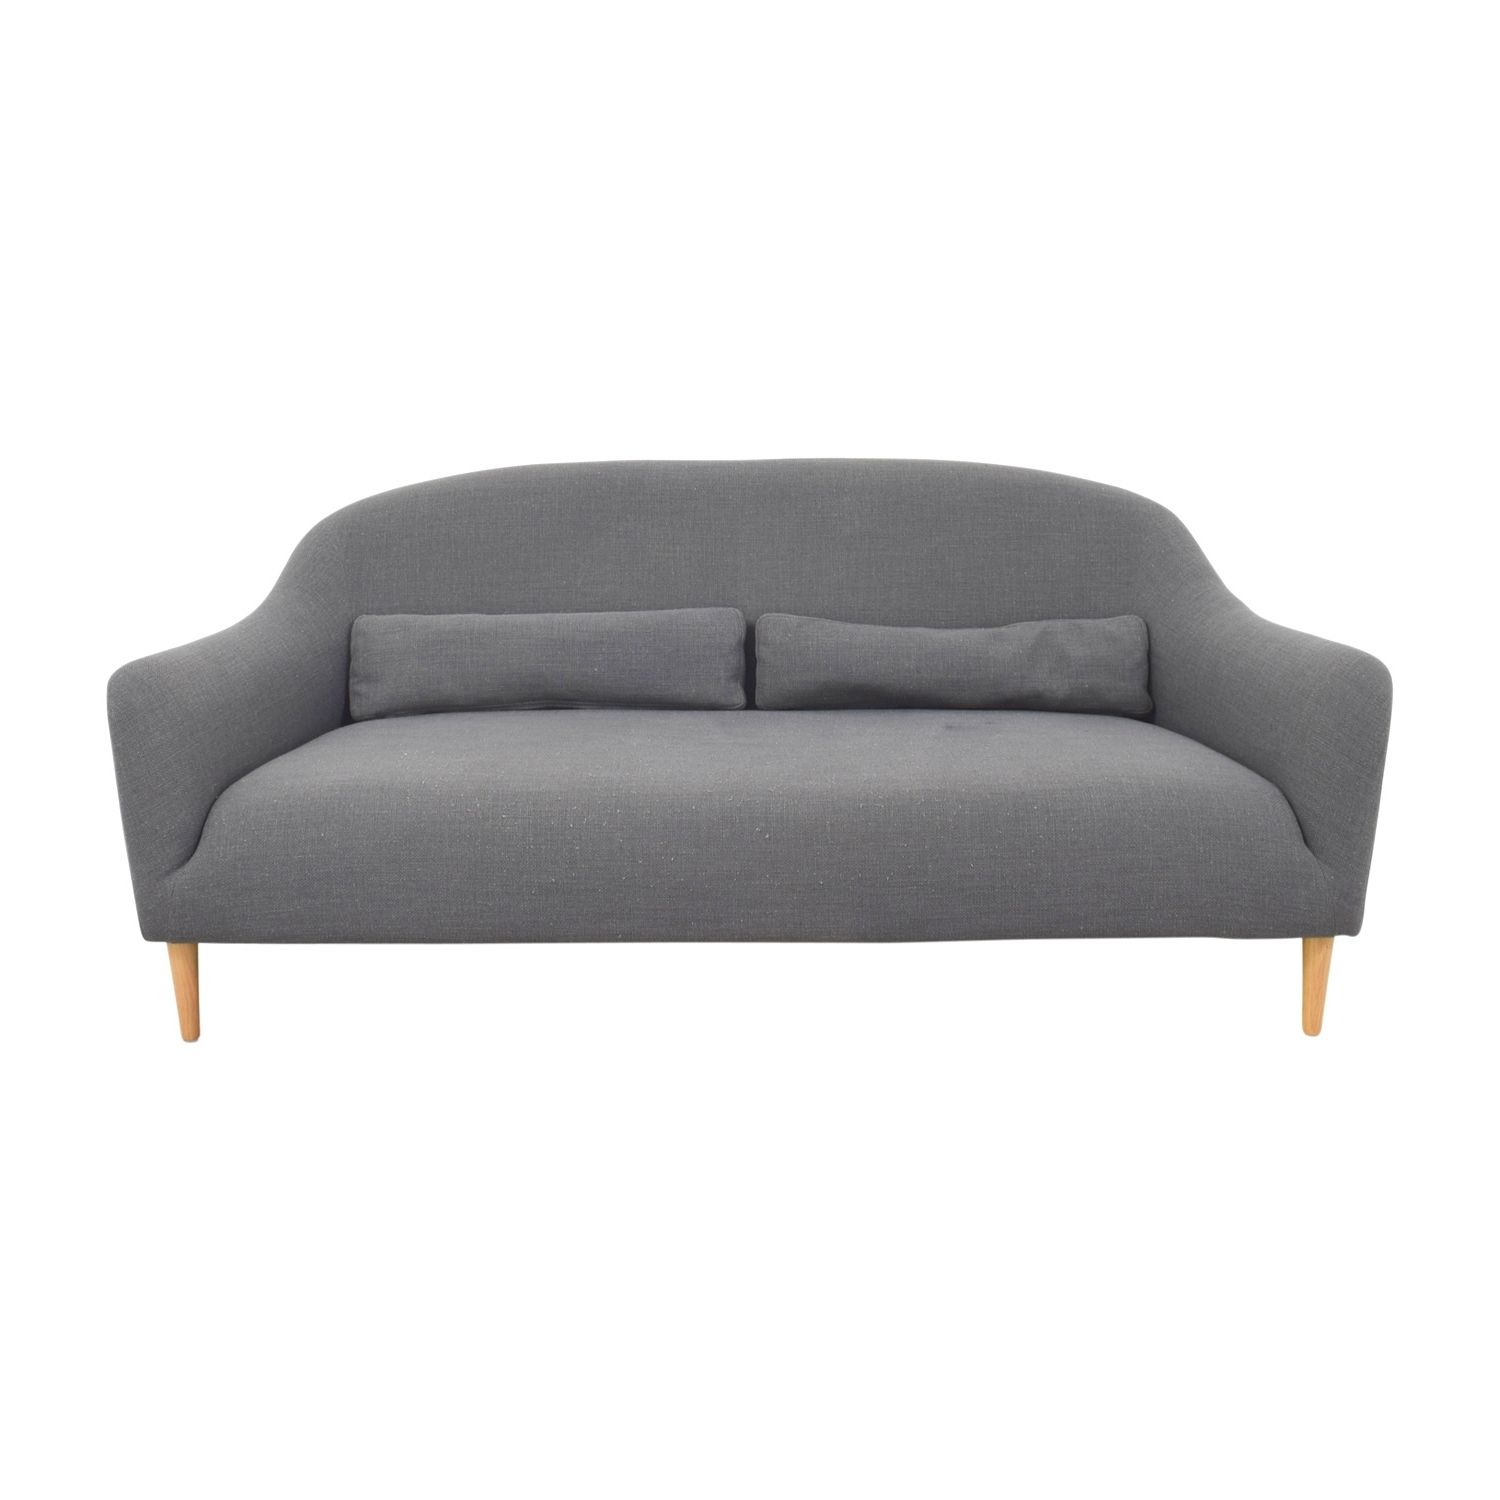 [%63% Off – Crate & Barrel Crate & Barrel Pennie Single Cushion Sofa Pertaining To Widely Used Single Sofas|single Sofas Intended For Well Known 63% Off – Crate & Barrel Crate & Barrel Pennie Single Cushion Sofa|trendy Single Sofas Regarding 63% Off – Crate & Barrel Crate & Barrel Pennie Single Cushion Sofa|most Up To Date 63% Off – Crate & Barrel Crate & Barrel Pennie Single Cushion Sofa Pertaining To Single Sofas%] (View 3 of 20)